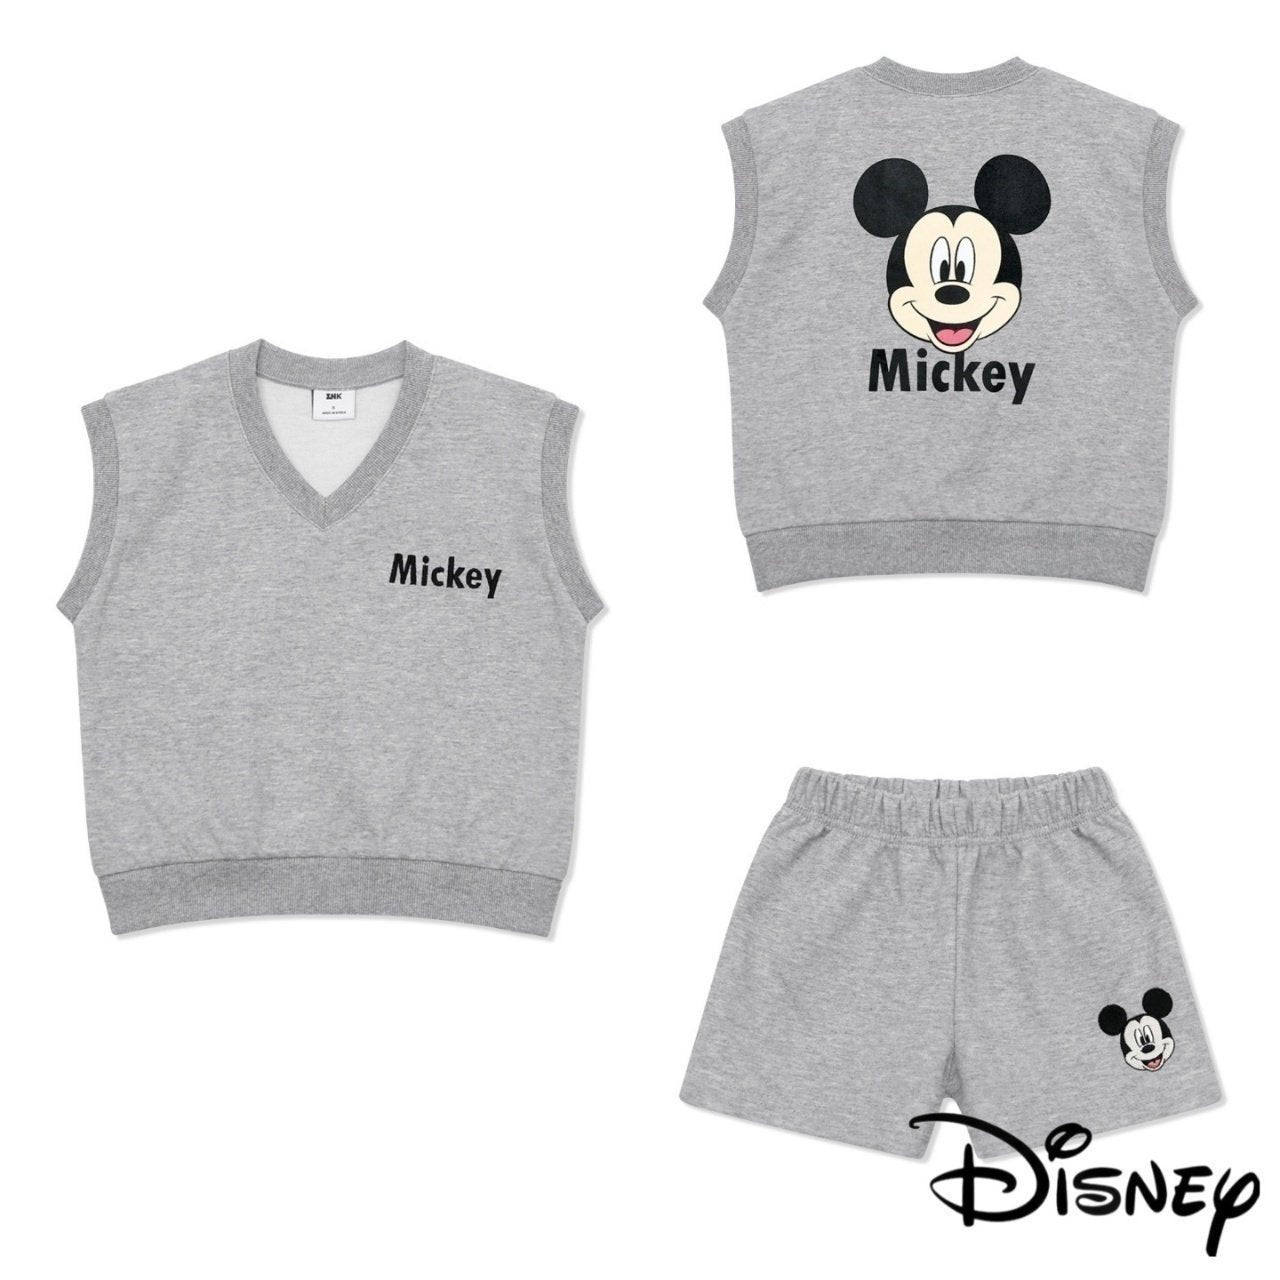 Toddler Mickey's Friends Sleeveless Sweatshirt and Shorts Set (2-7y) - 4 Colors